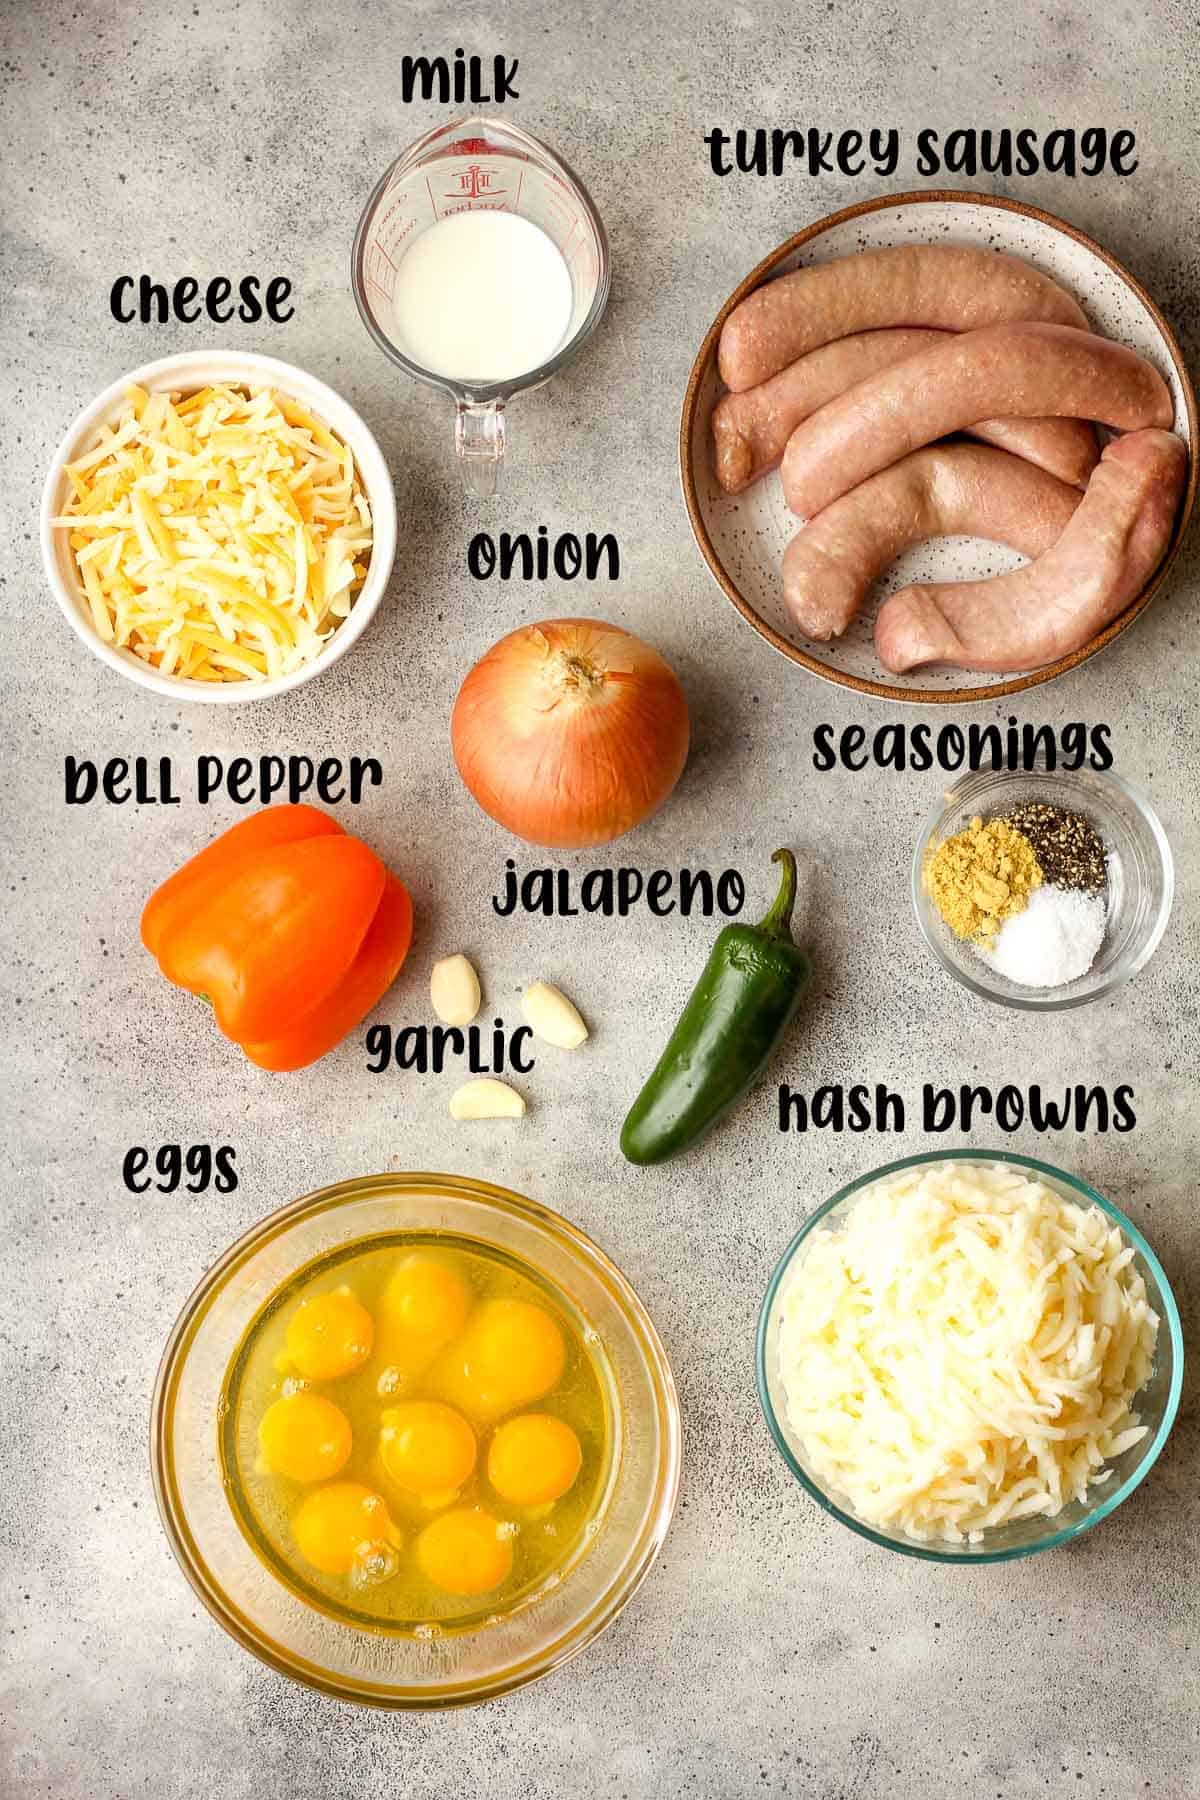 The labeled ingredients for the casserole.